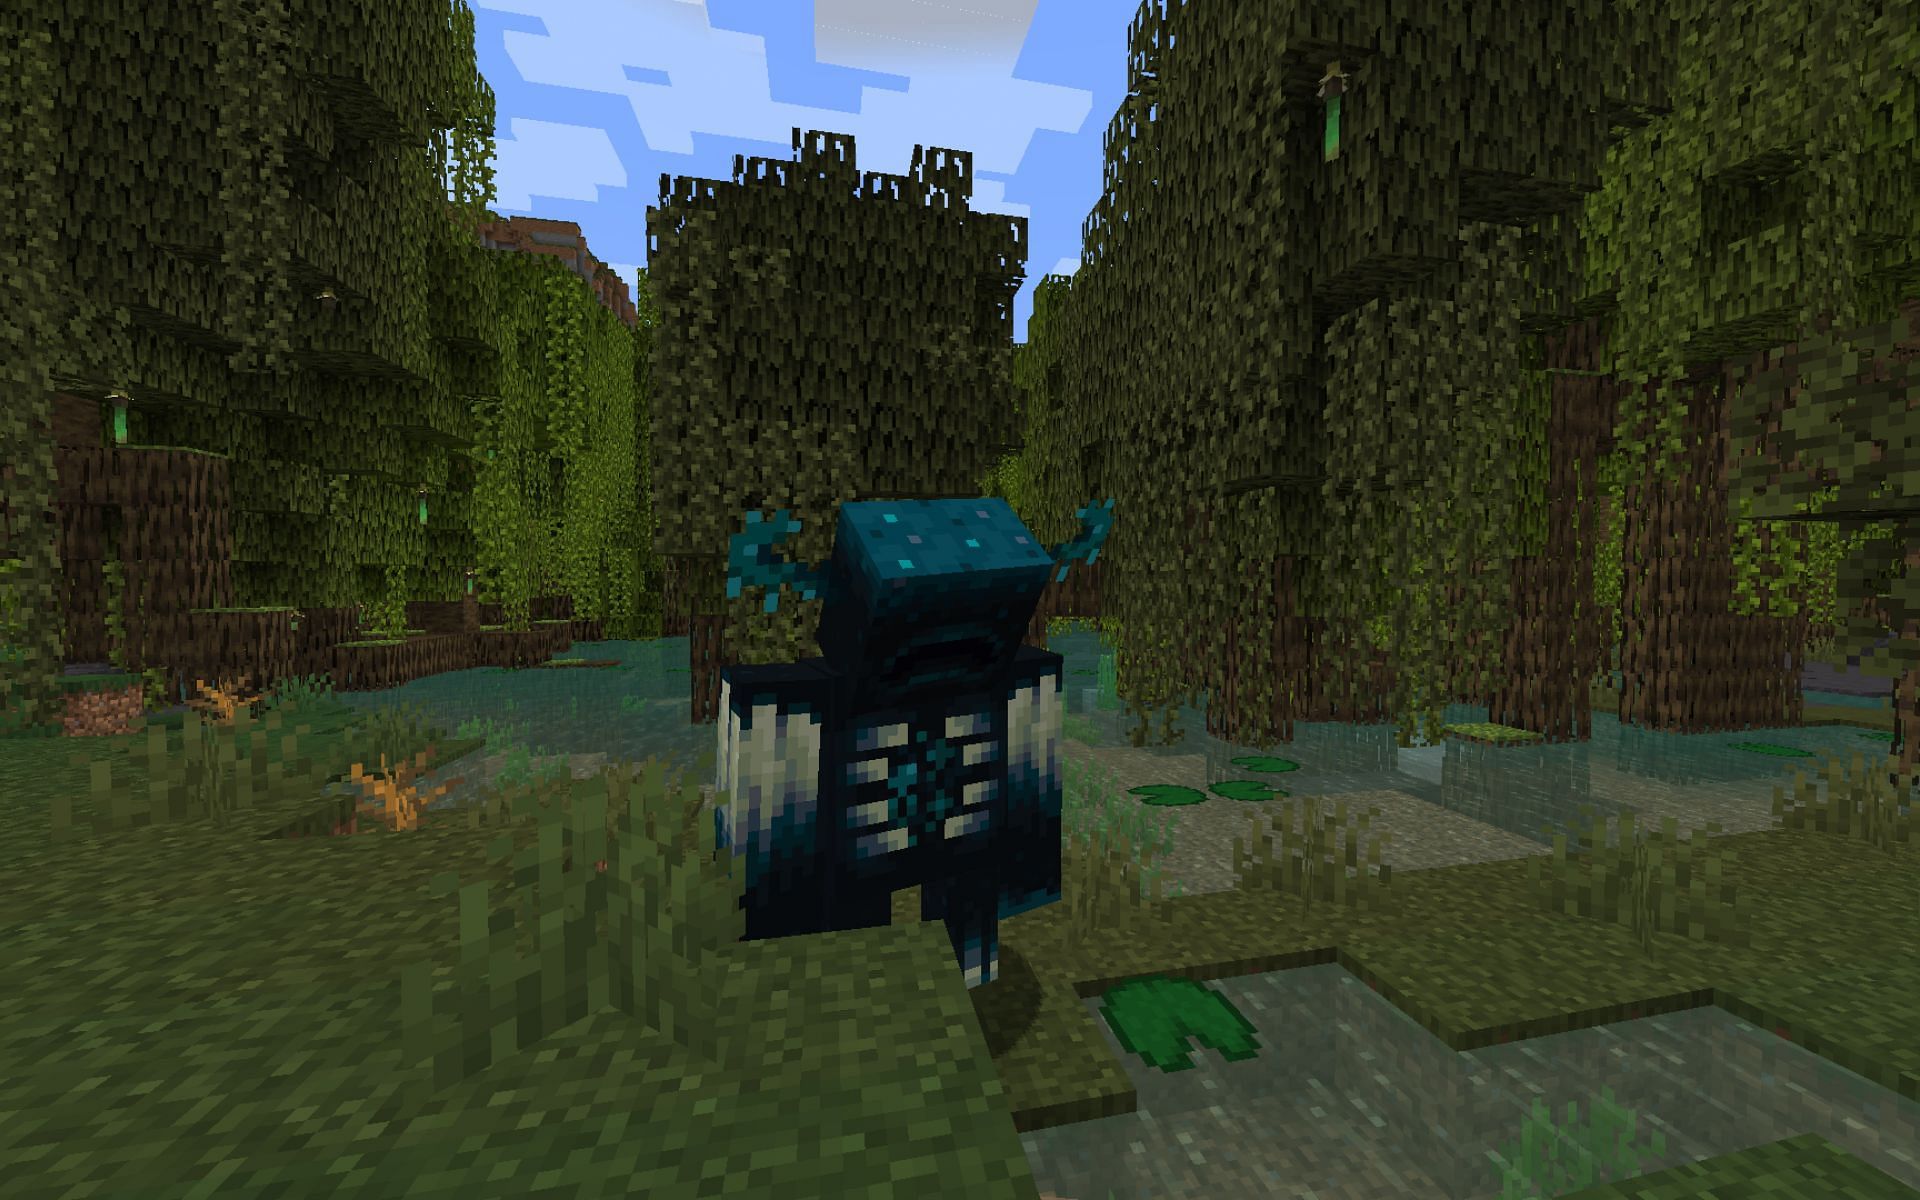 The Warden manually spawned in a Mangrove Swamp (Image via Minecraft 1.19 snapshot)